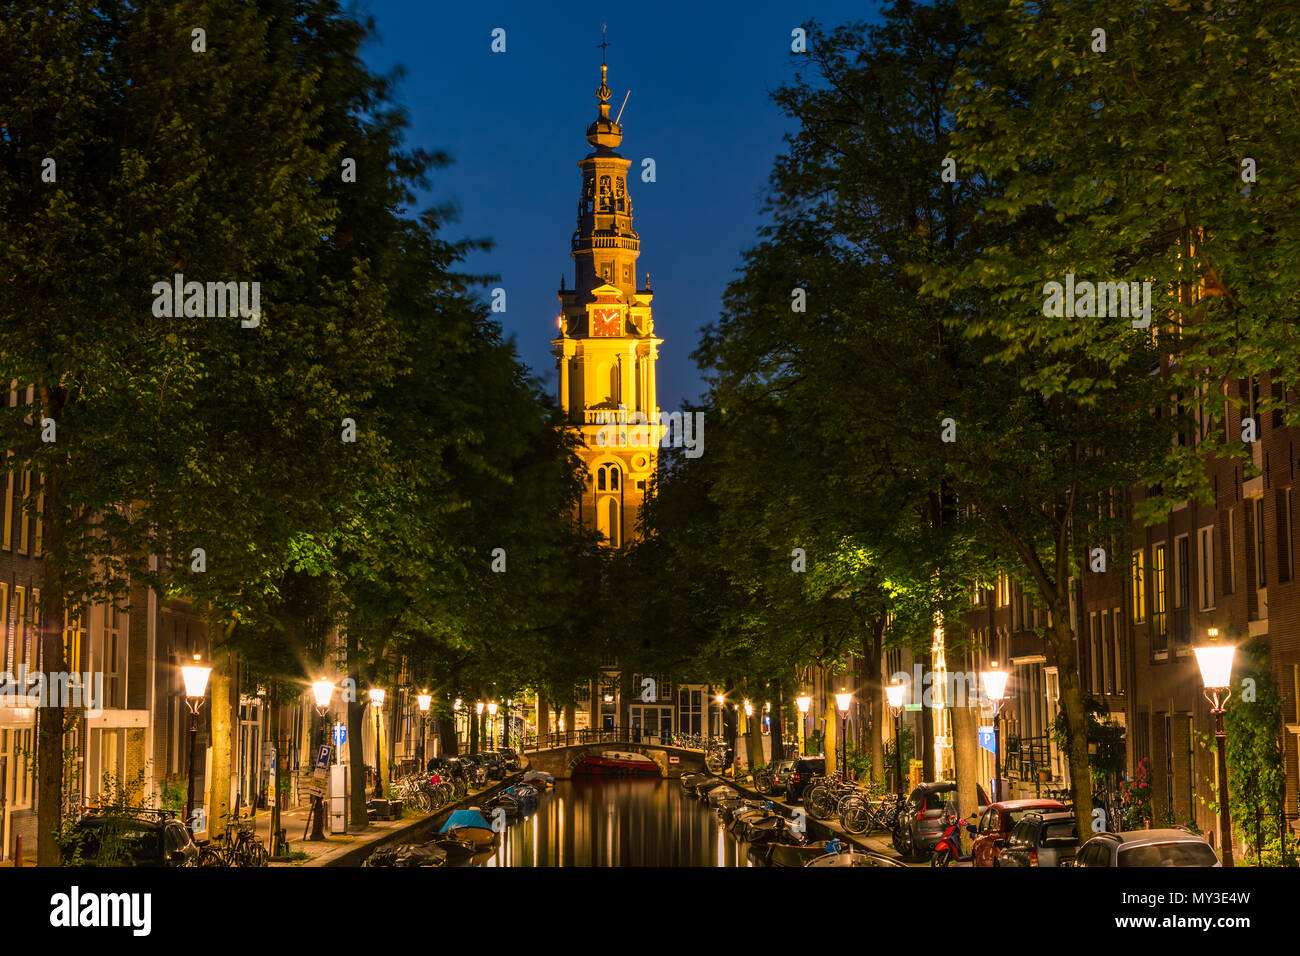 The Zuiderkerk ('southern church') is a 17th-century Protestant church in the Nieuwmarkt area of Amsterdam, the capital of the Netherlands. The church Stock Photo